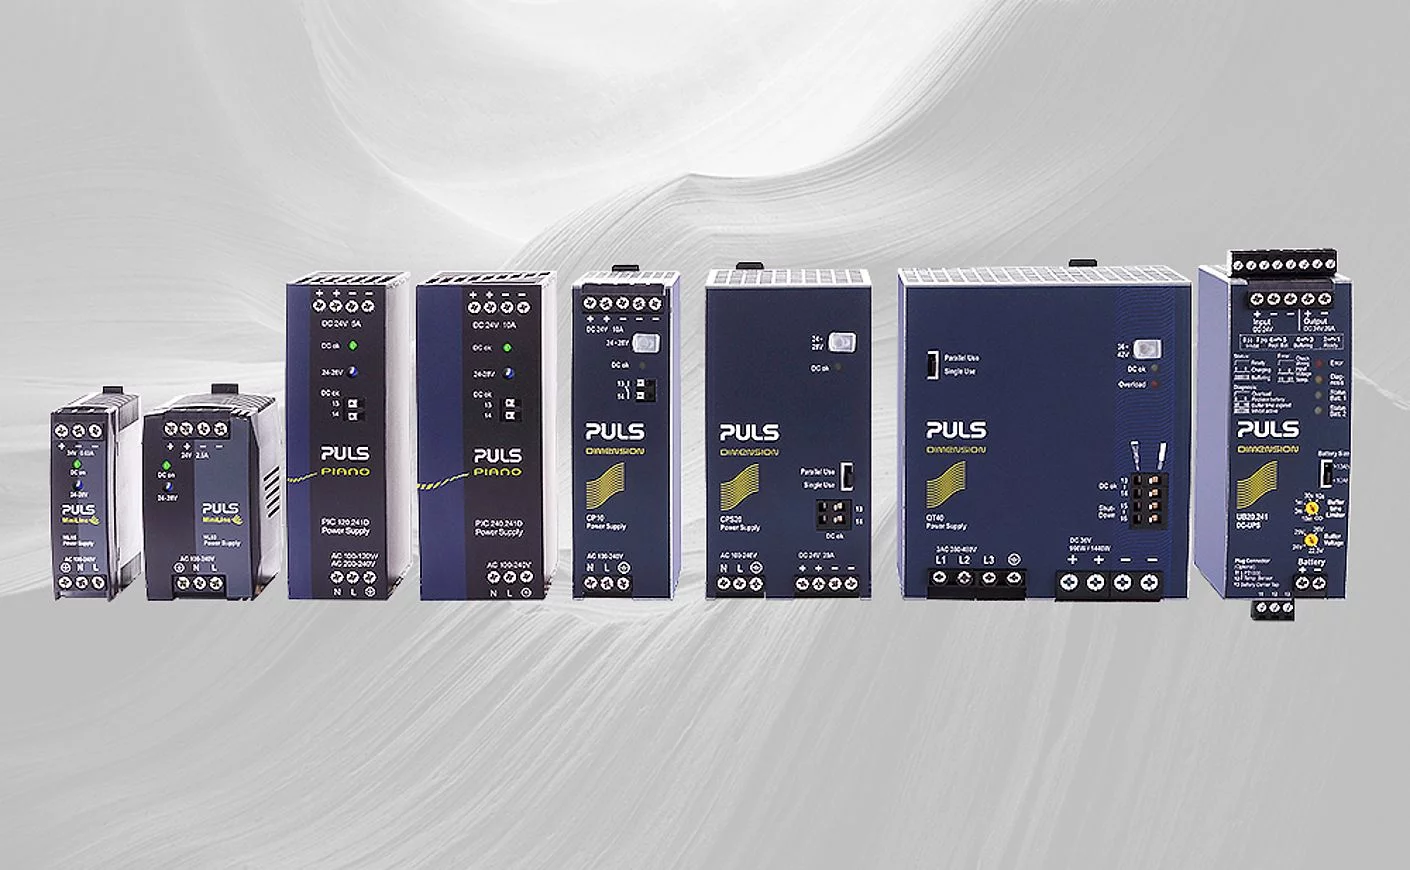 All PULS products